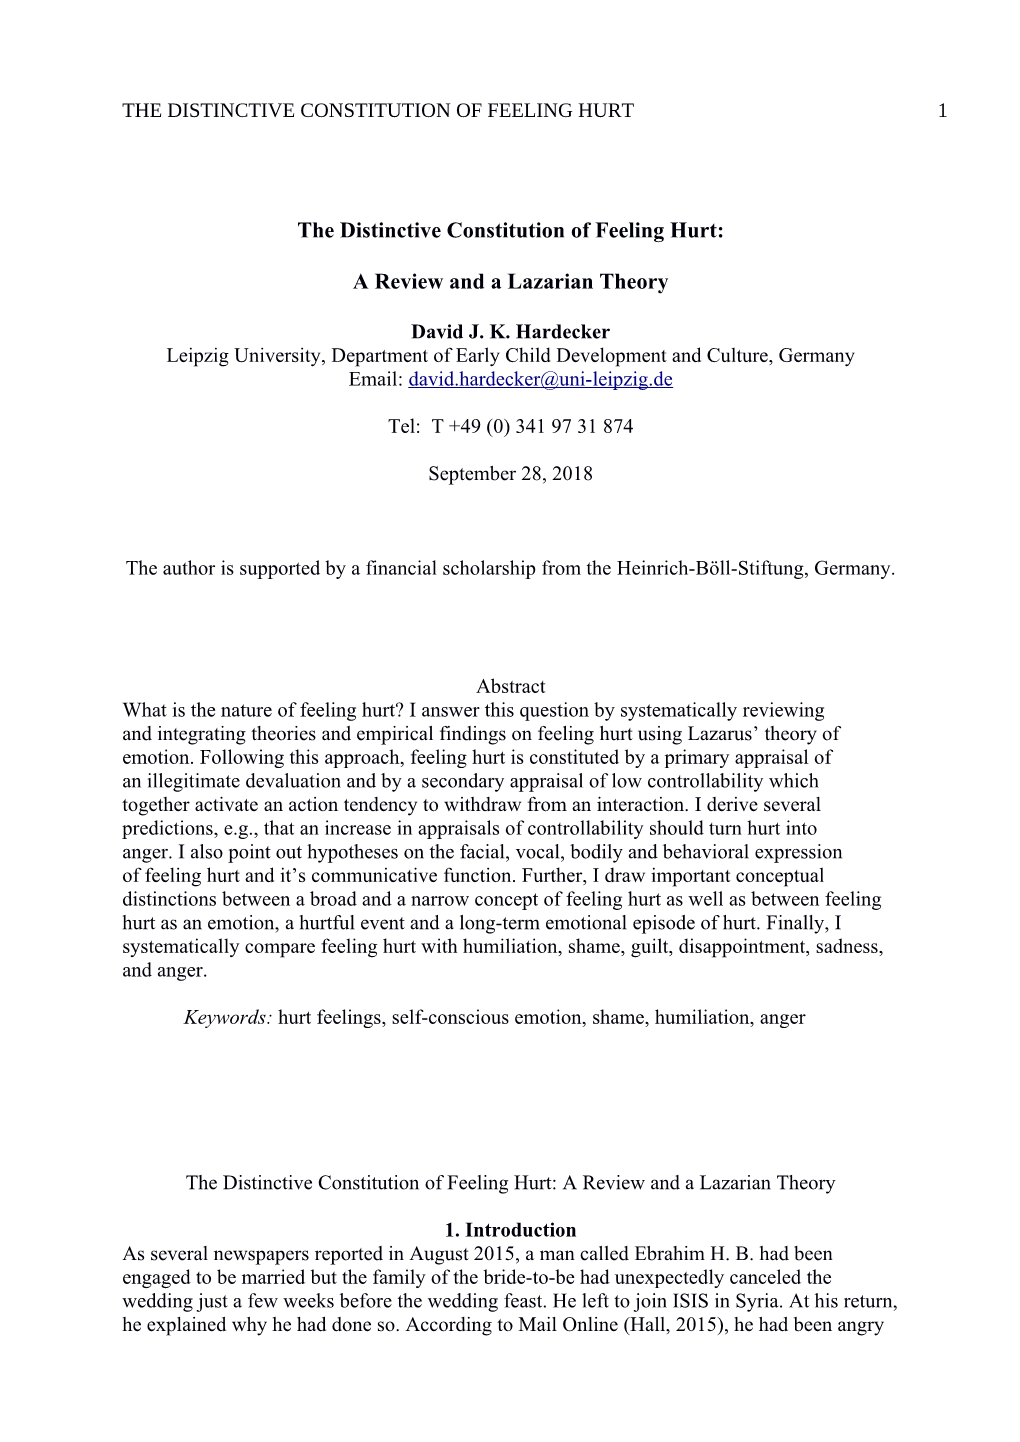 The Distinctive Constitution of Feeling Hurt: a Review and a Lazarian Theory